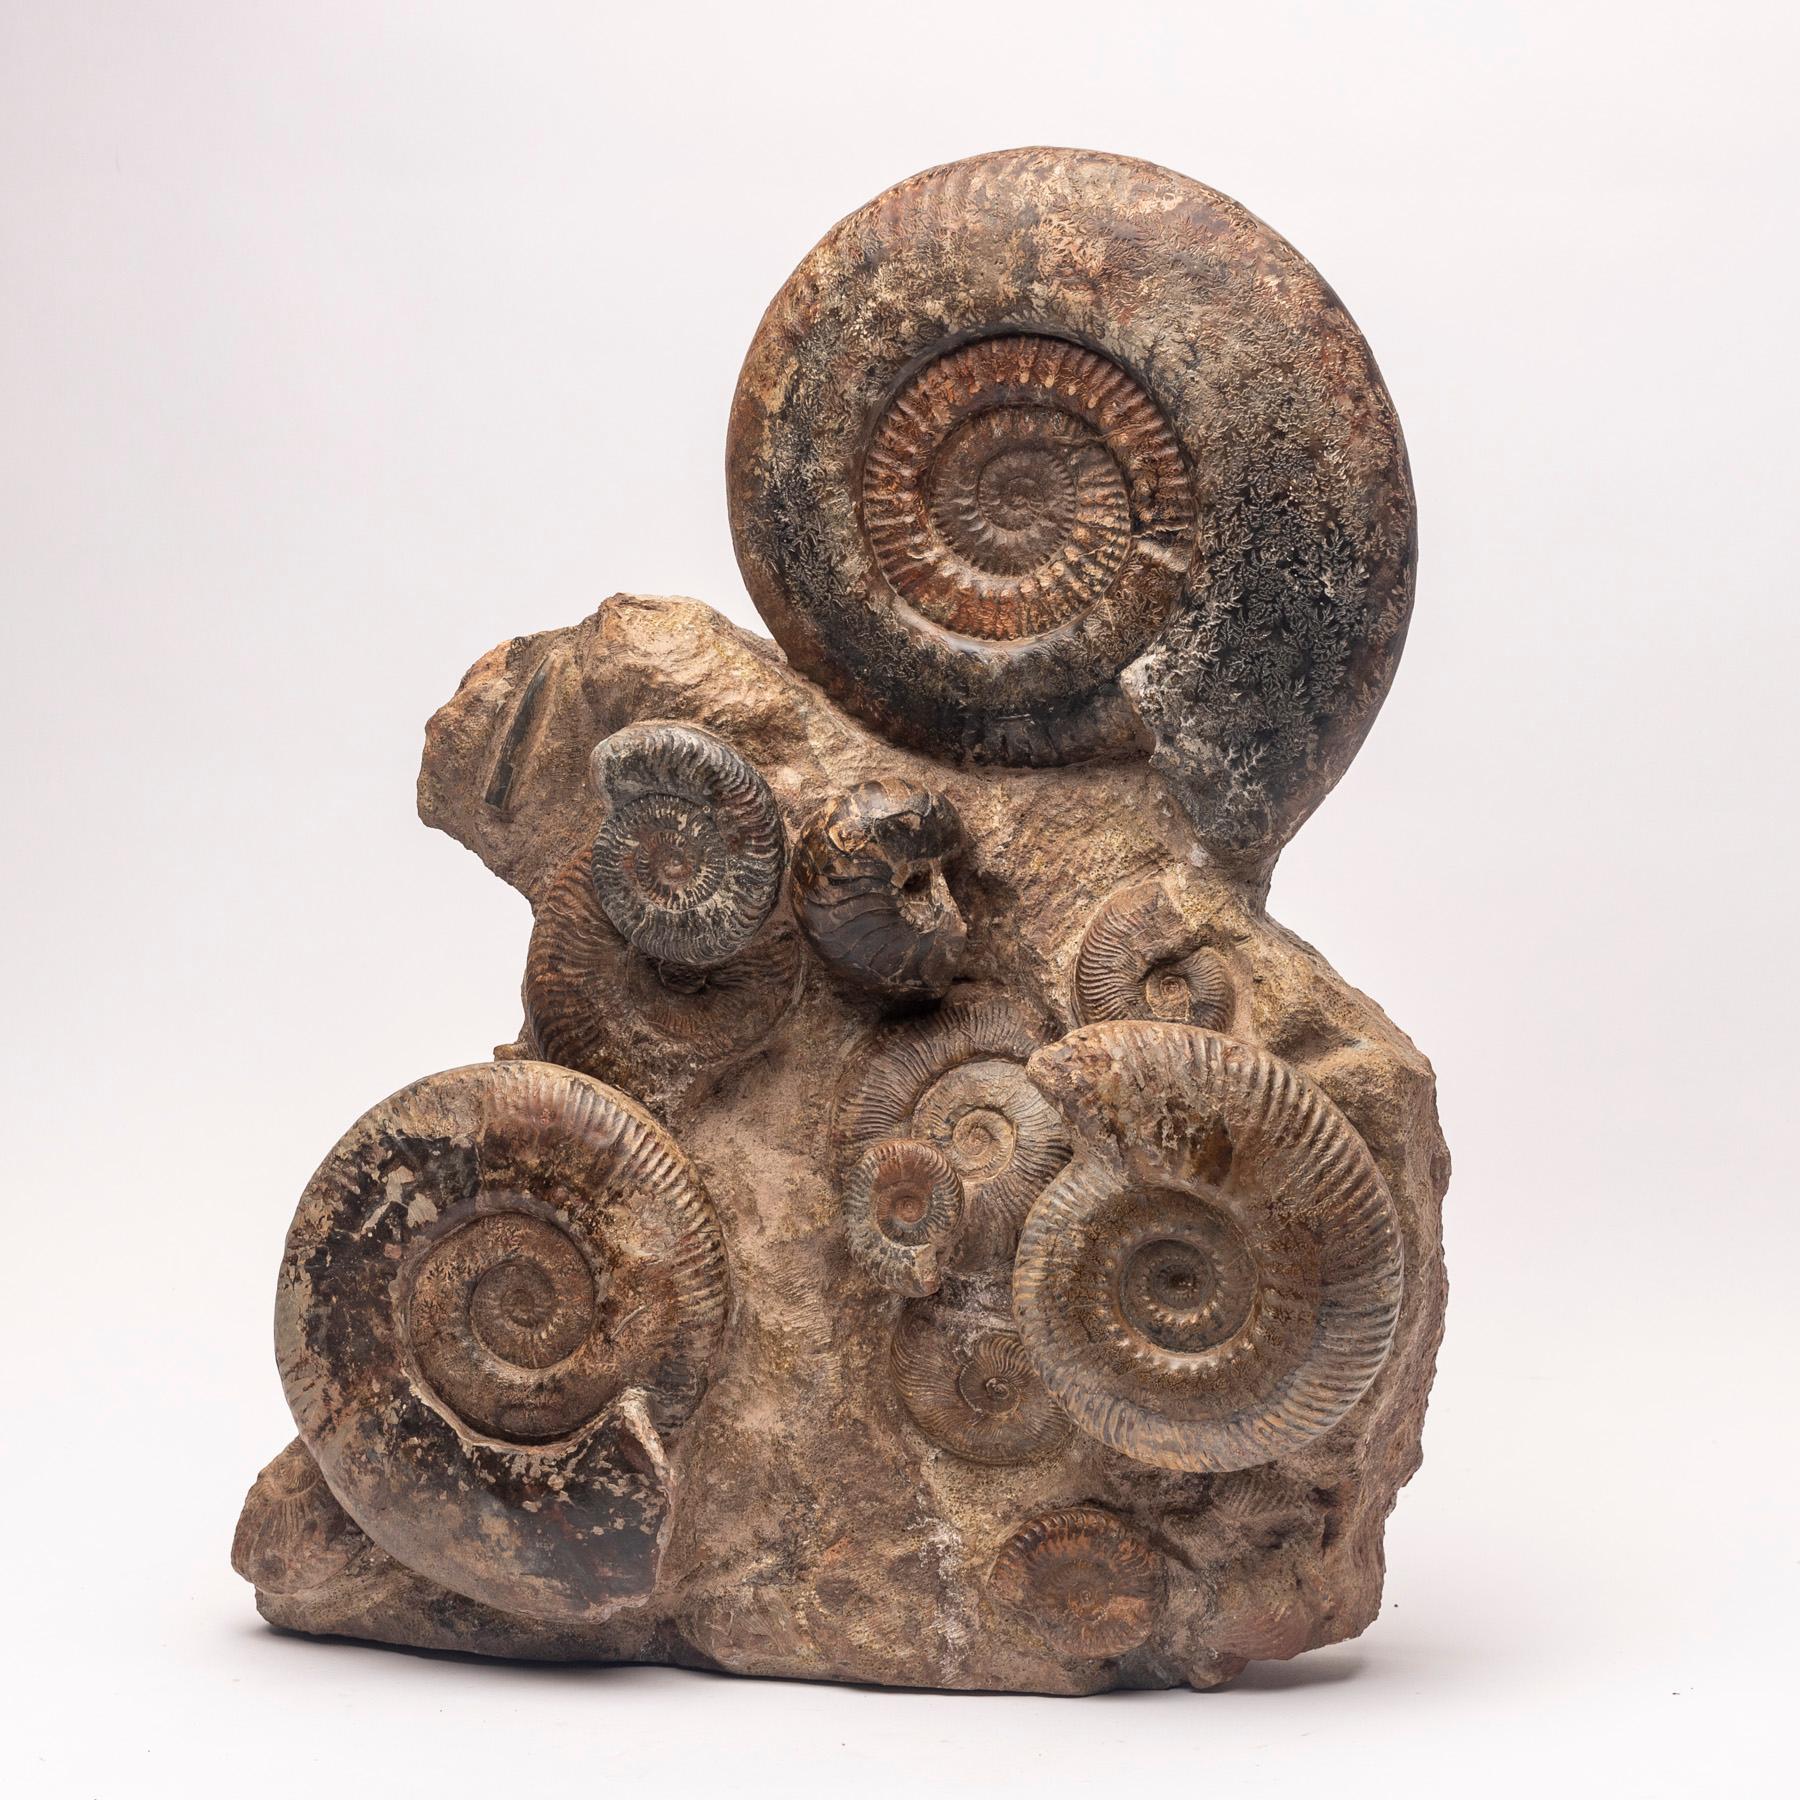 This natural fossil form, museum quality ammonite cluster from Madagascar comes from the Cretaceous period around 65 million years old.
 